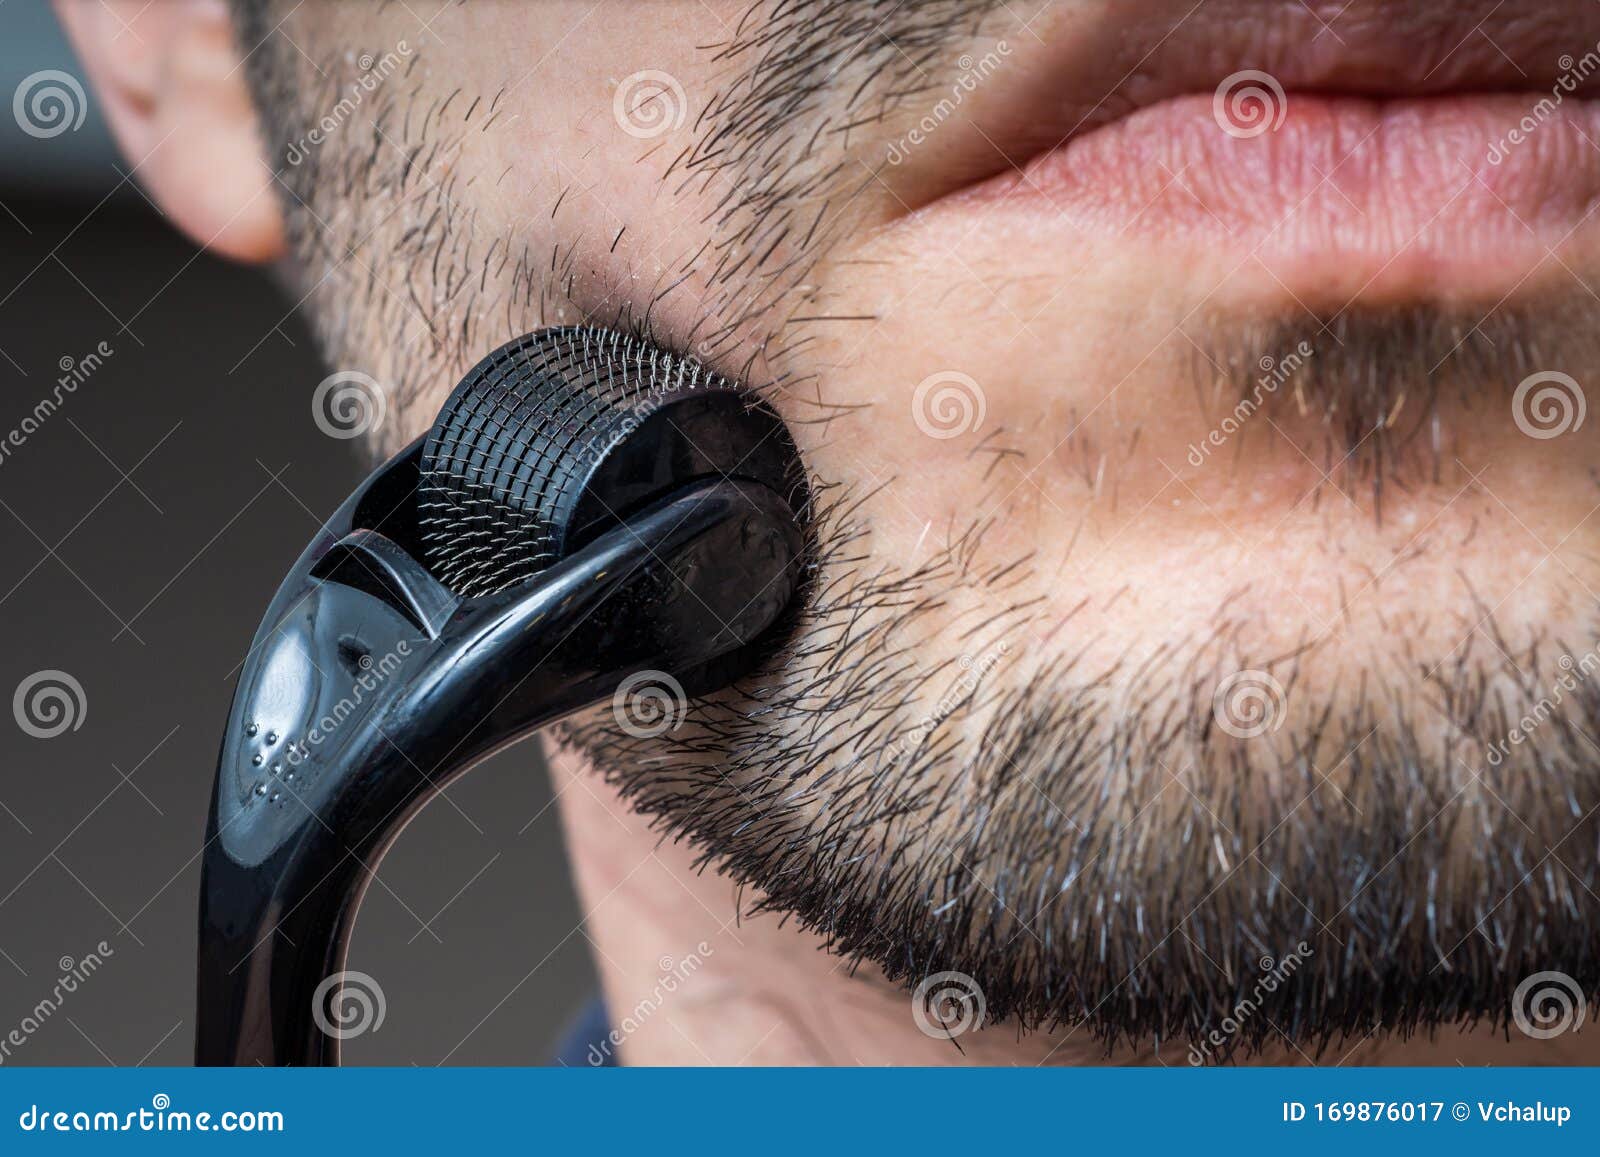 facial hair care concept. young man is using derma roller  on beard.